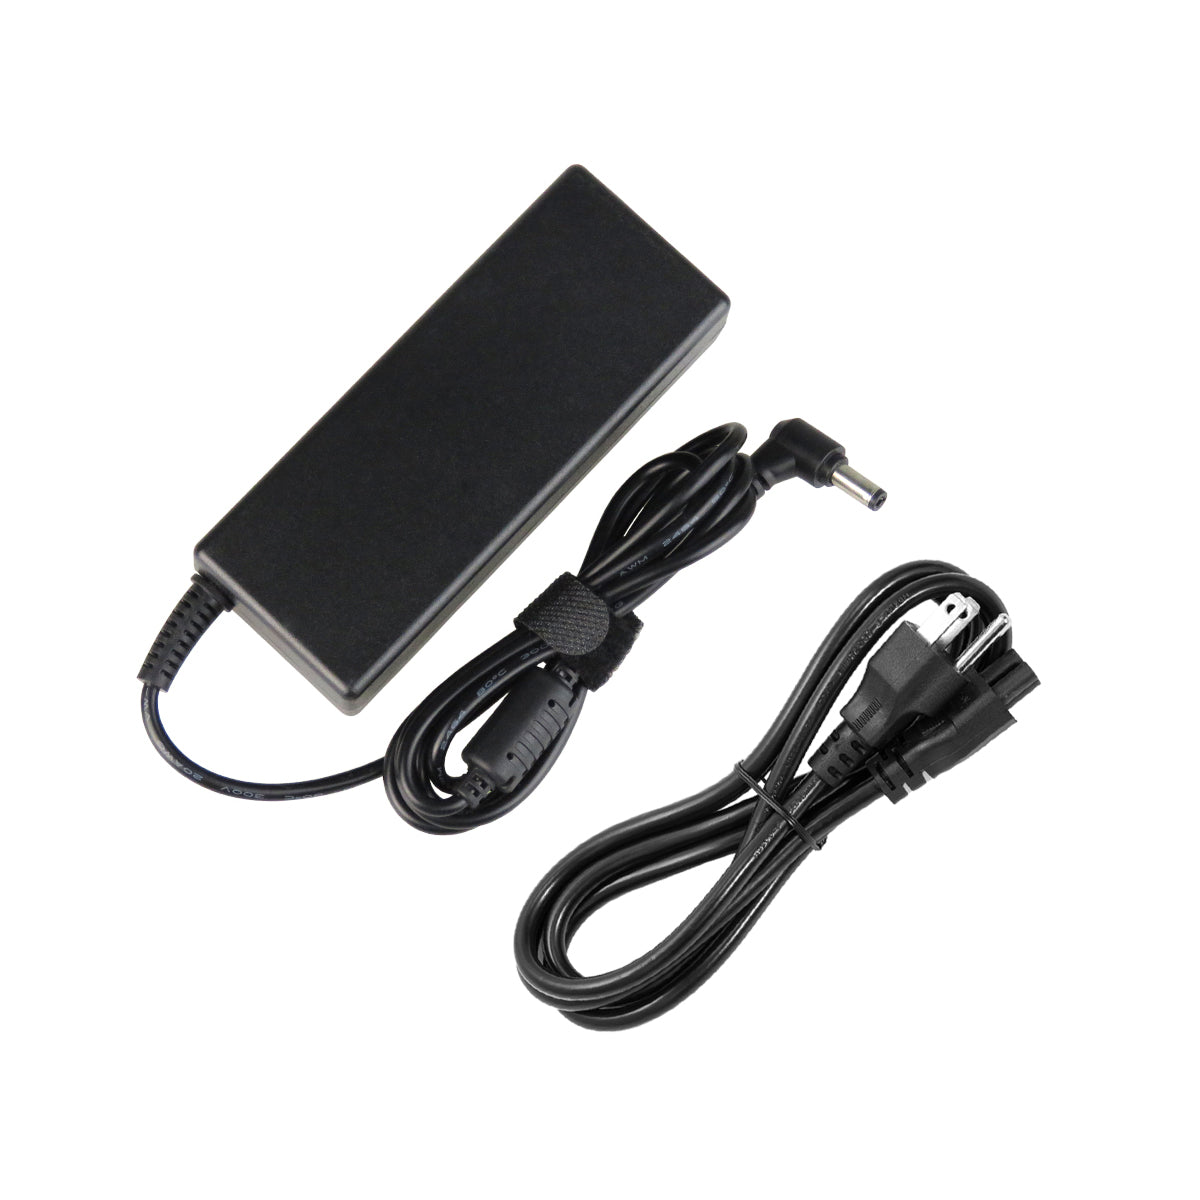 AC Adapter Charger for ASUS X51RL Notebook.